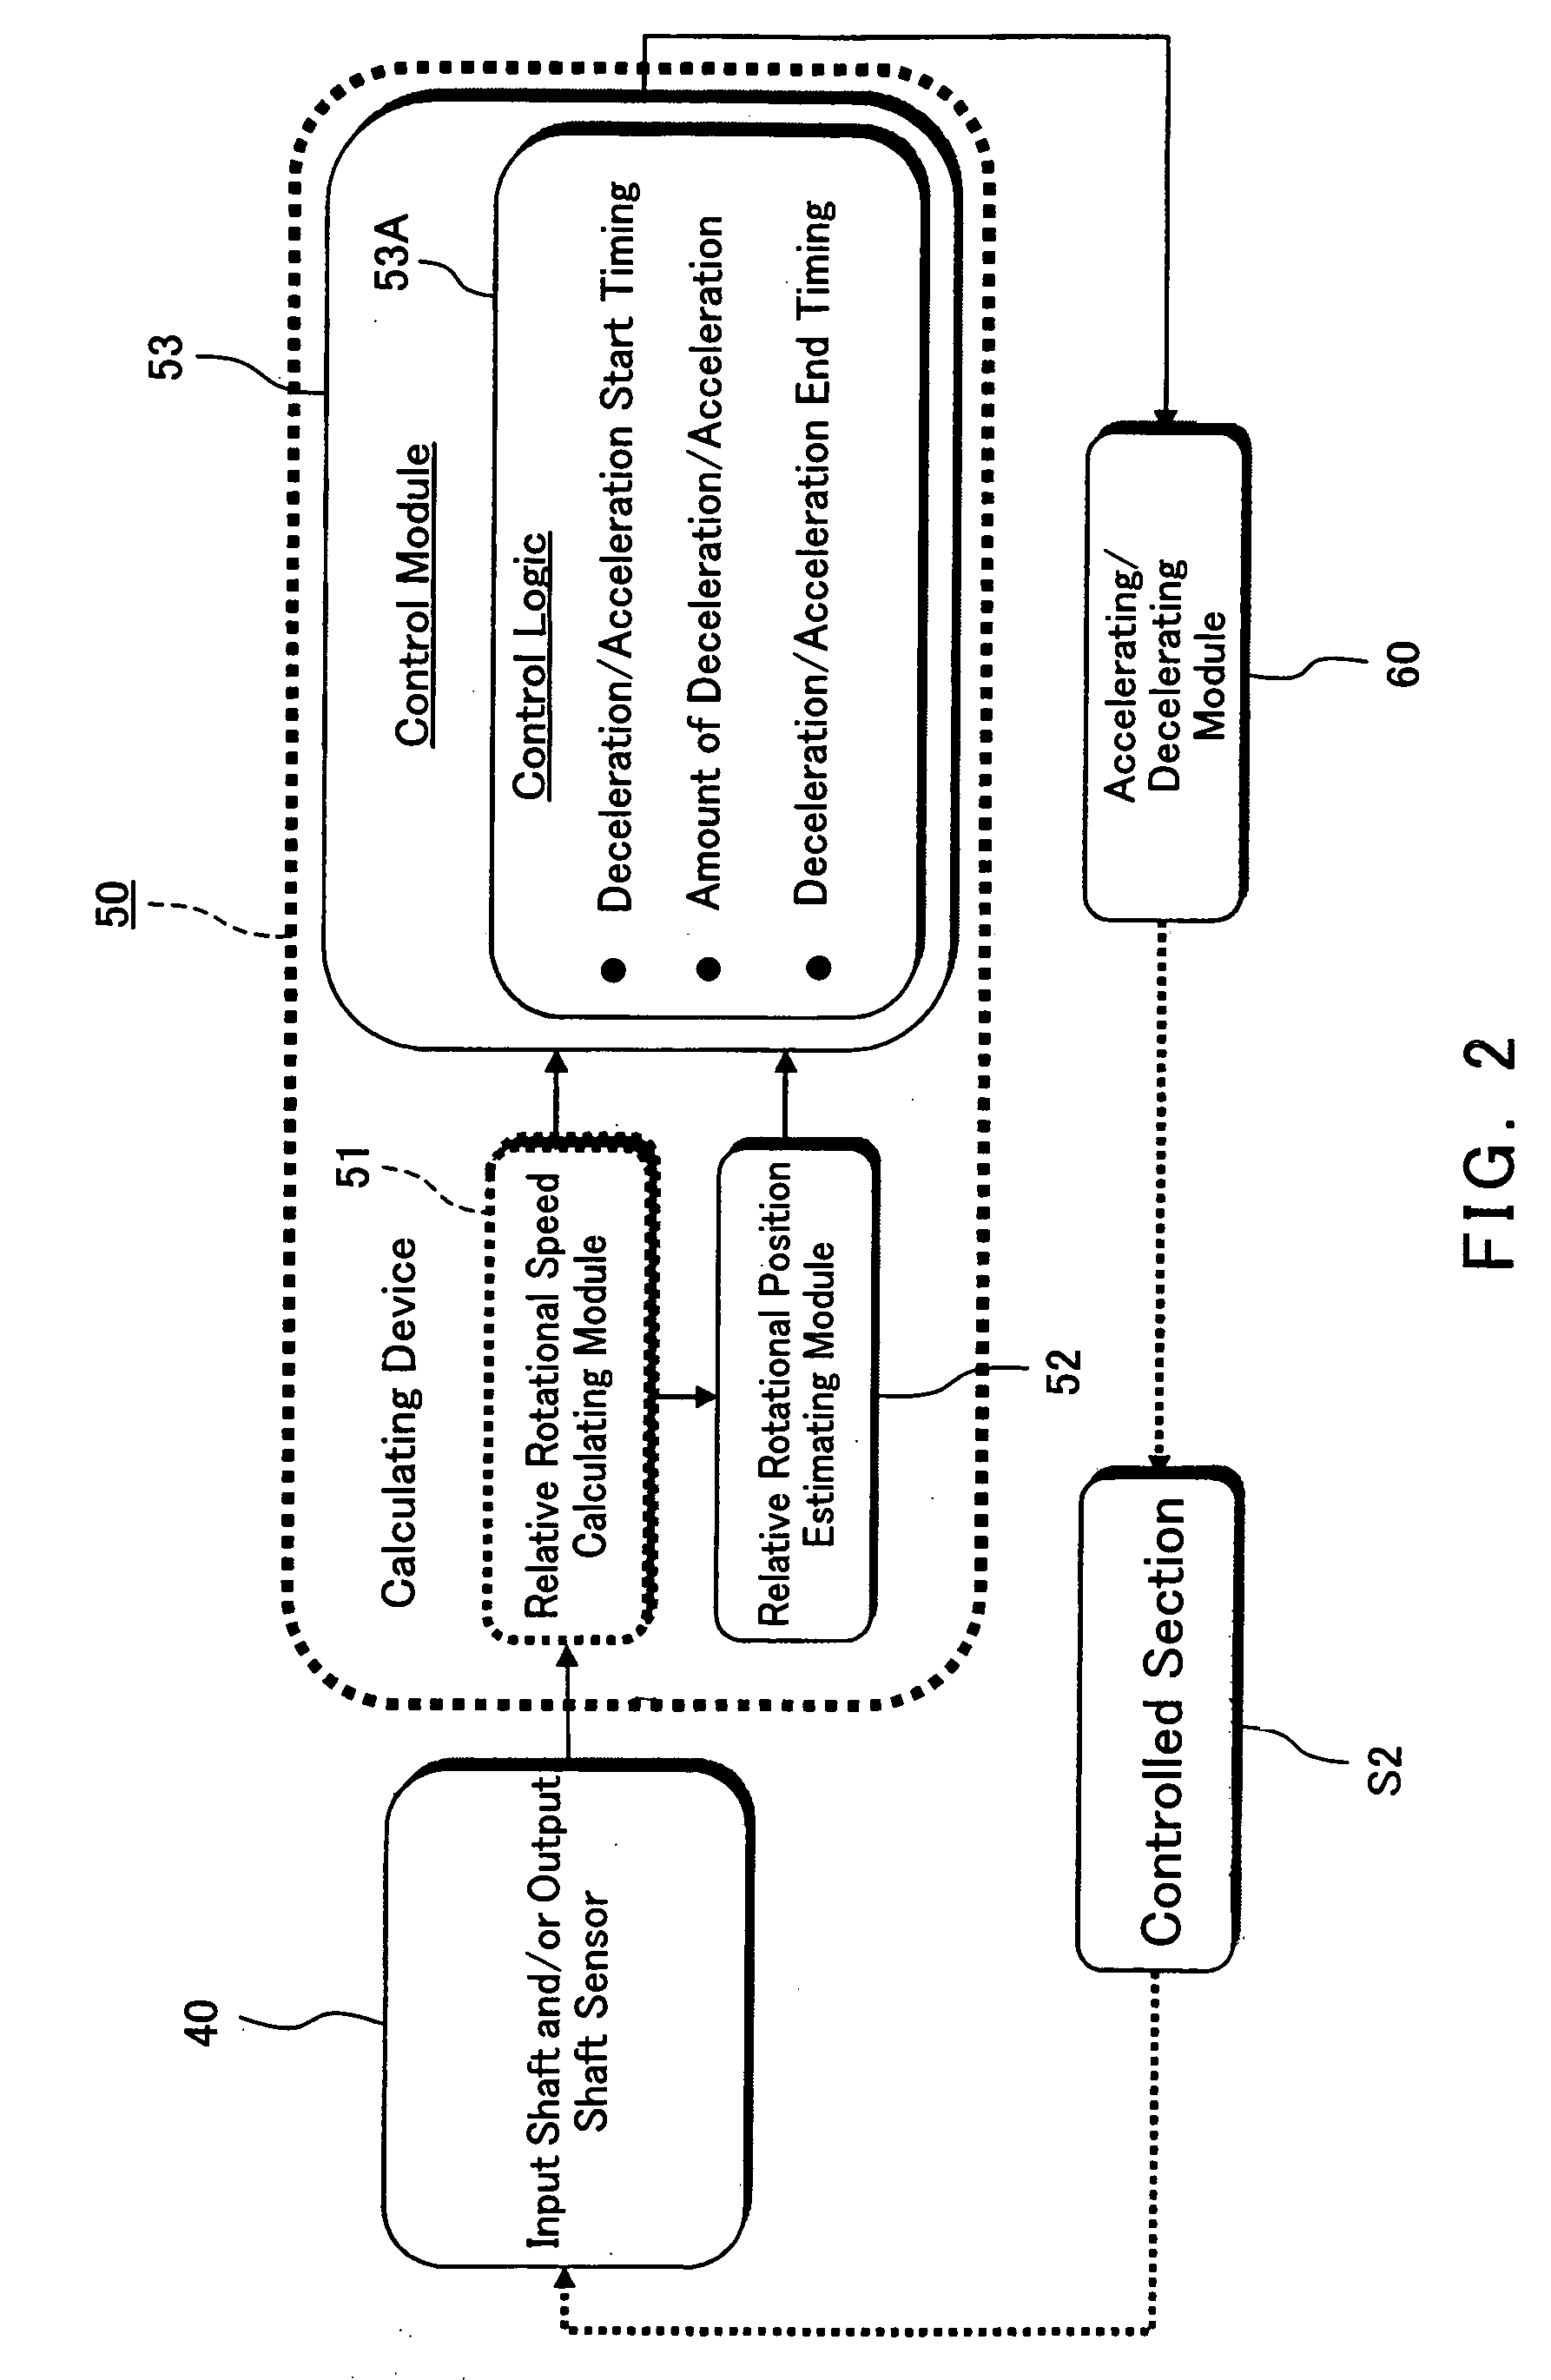 Method and apparatus of controlling acceleration/deceleration of a vehicle